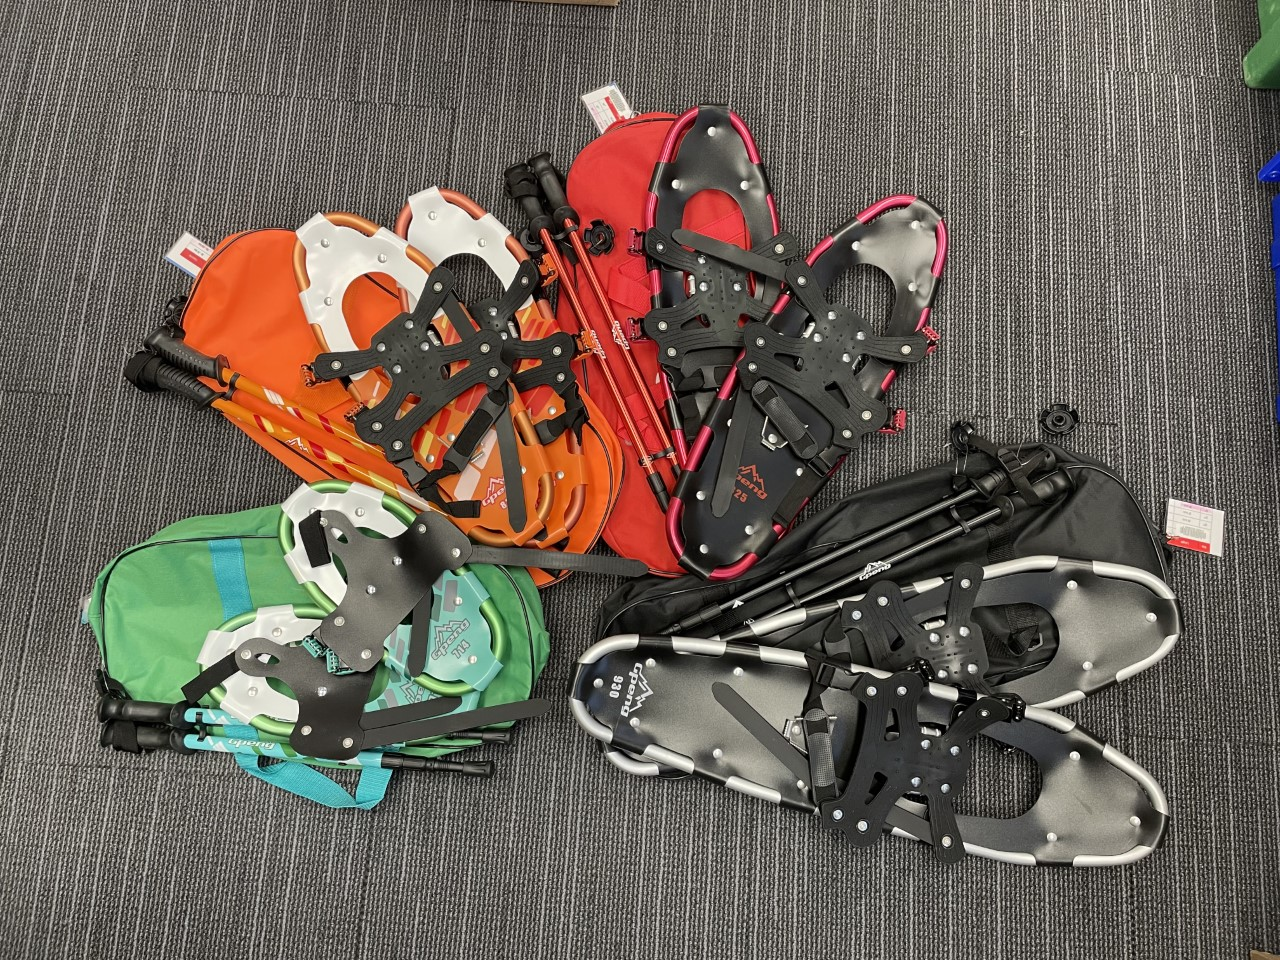 Snowshoes laid out on floor